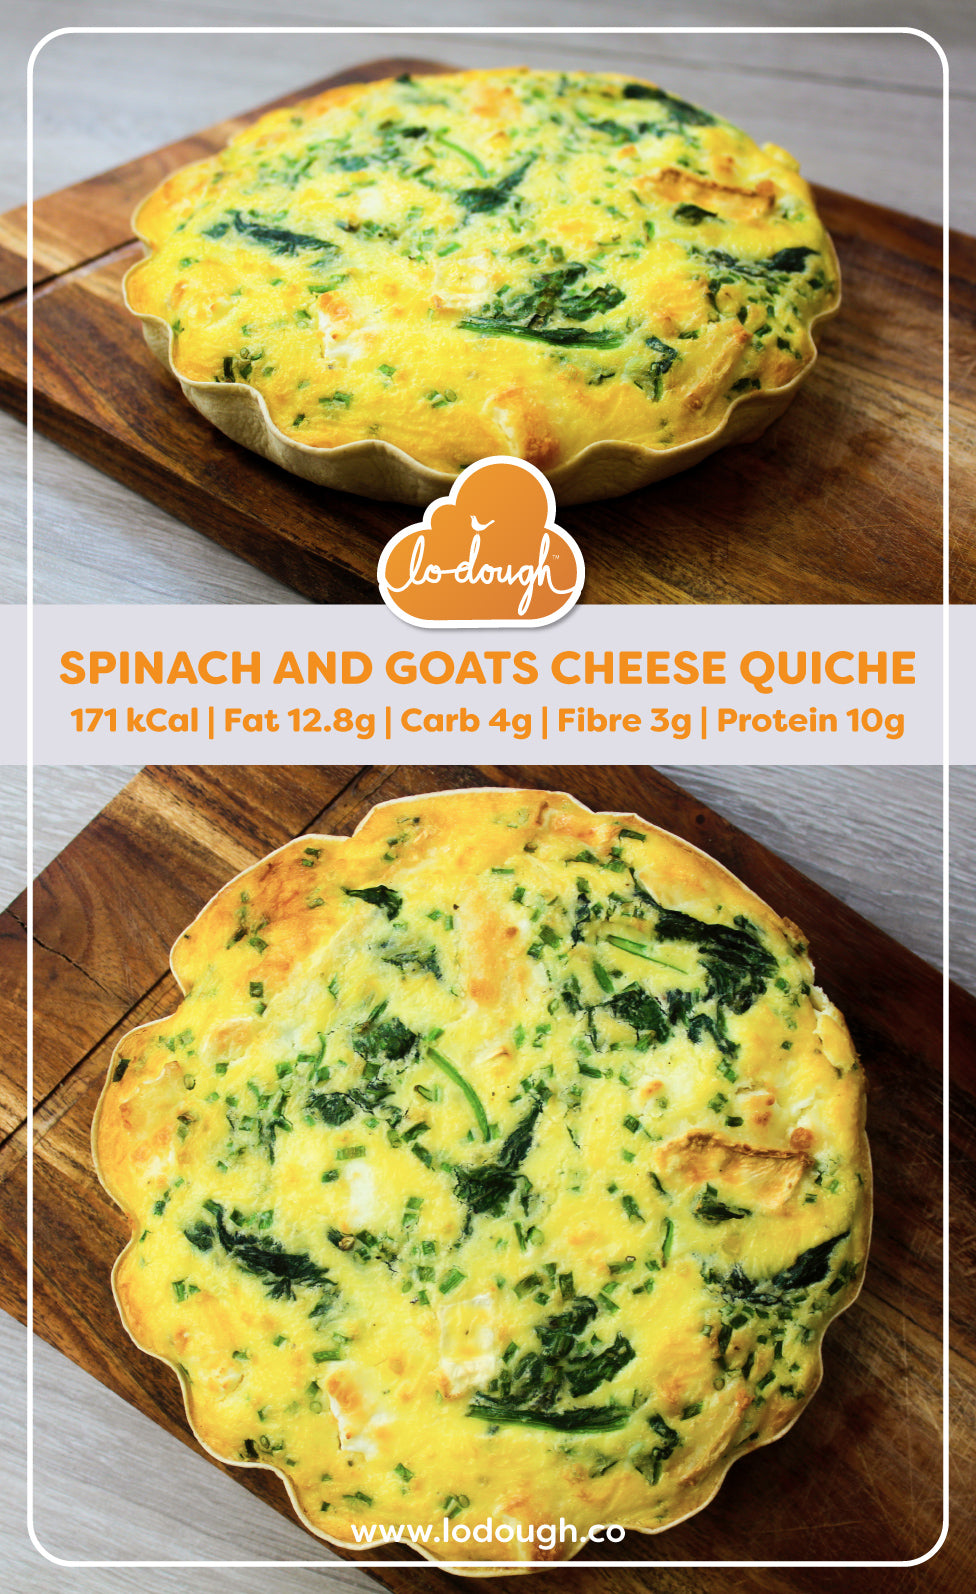 Spinach & Goats Cheese Quiche